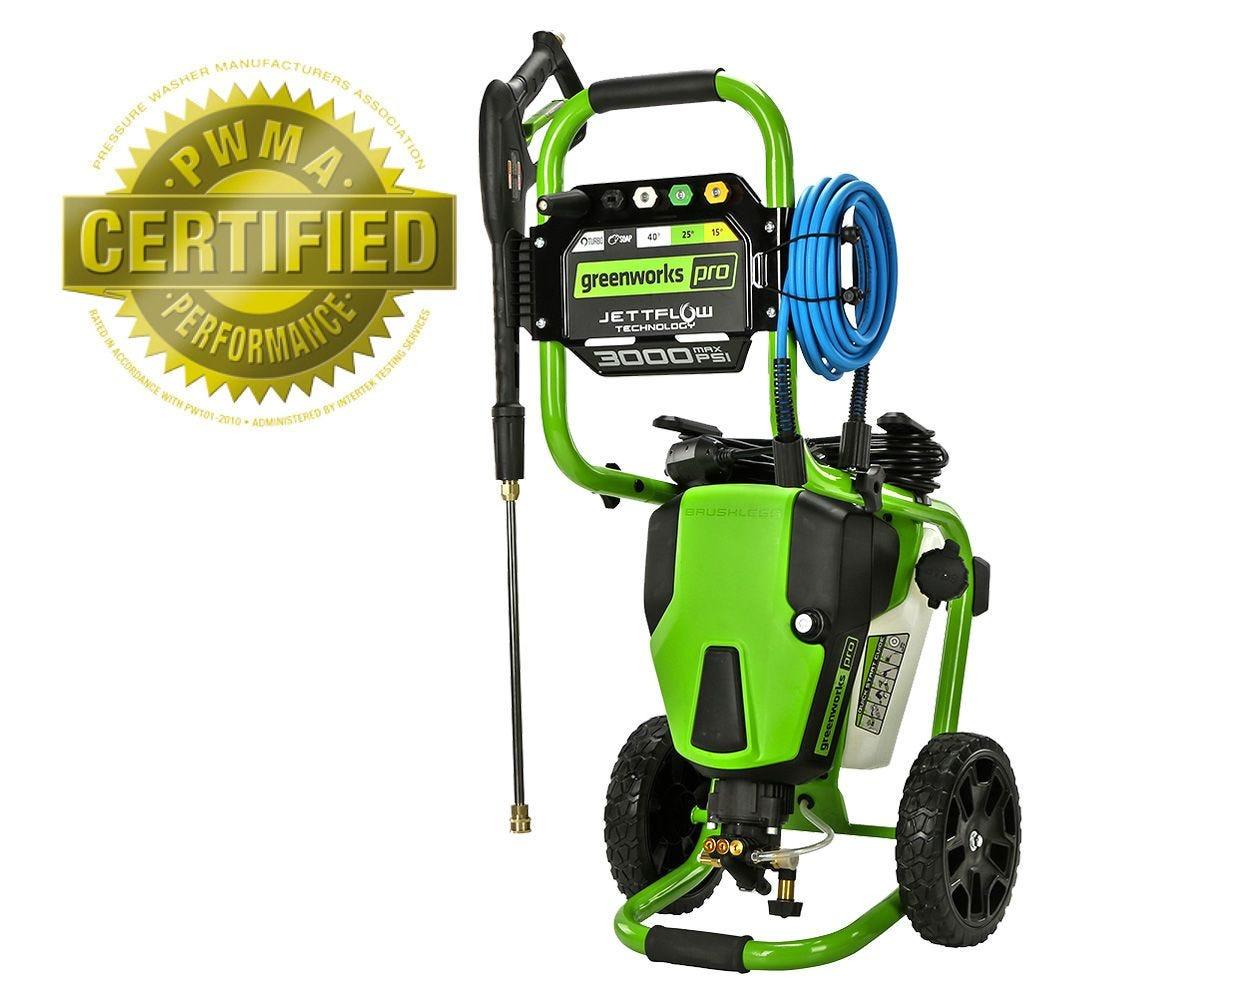 GreenWorks Pro 3000-PSI Brushless 2.0GPM Electric Pressure Washer for $299.99 Shipped